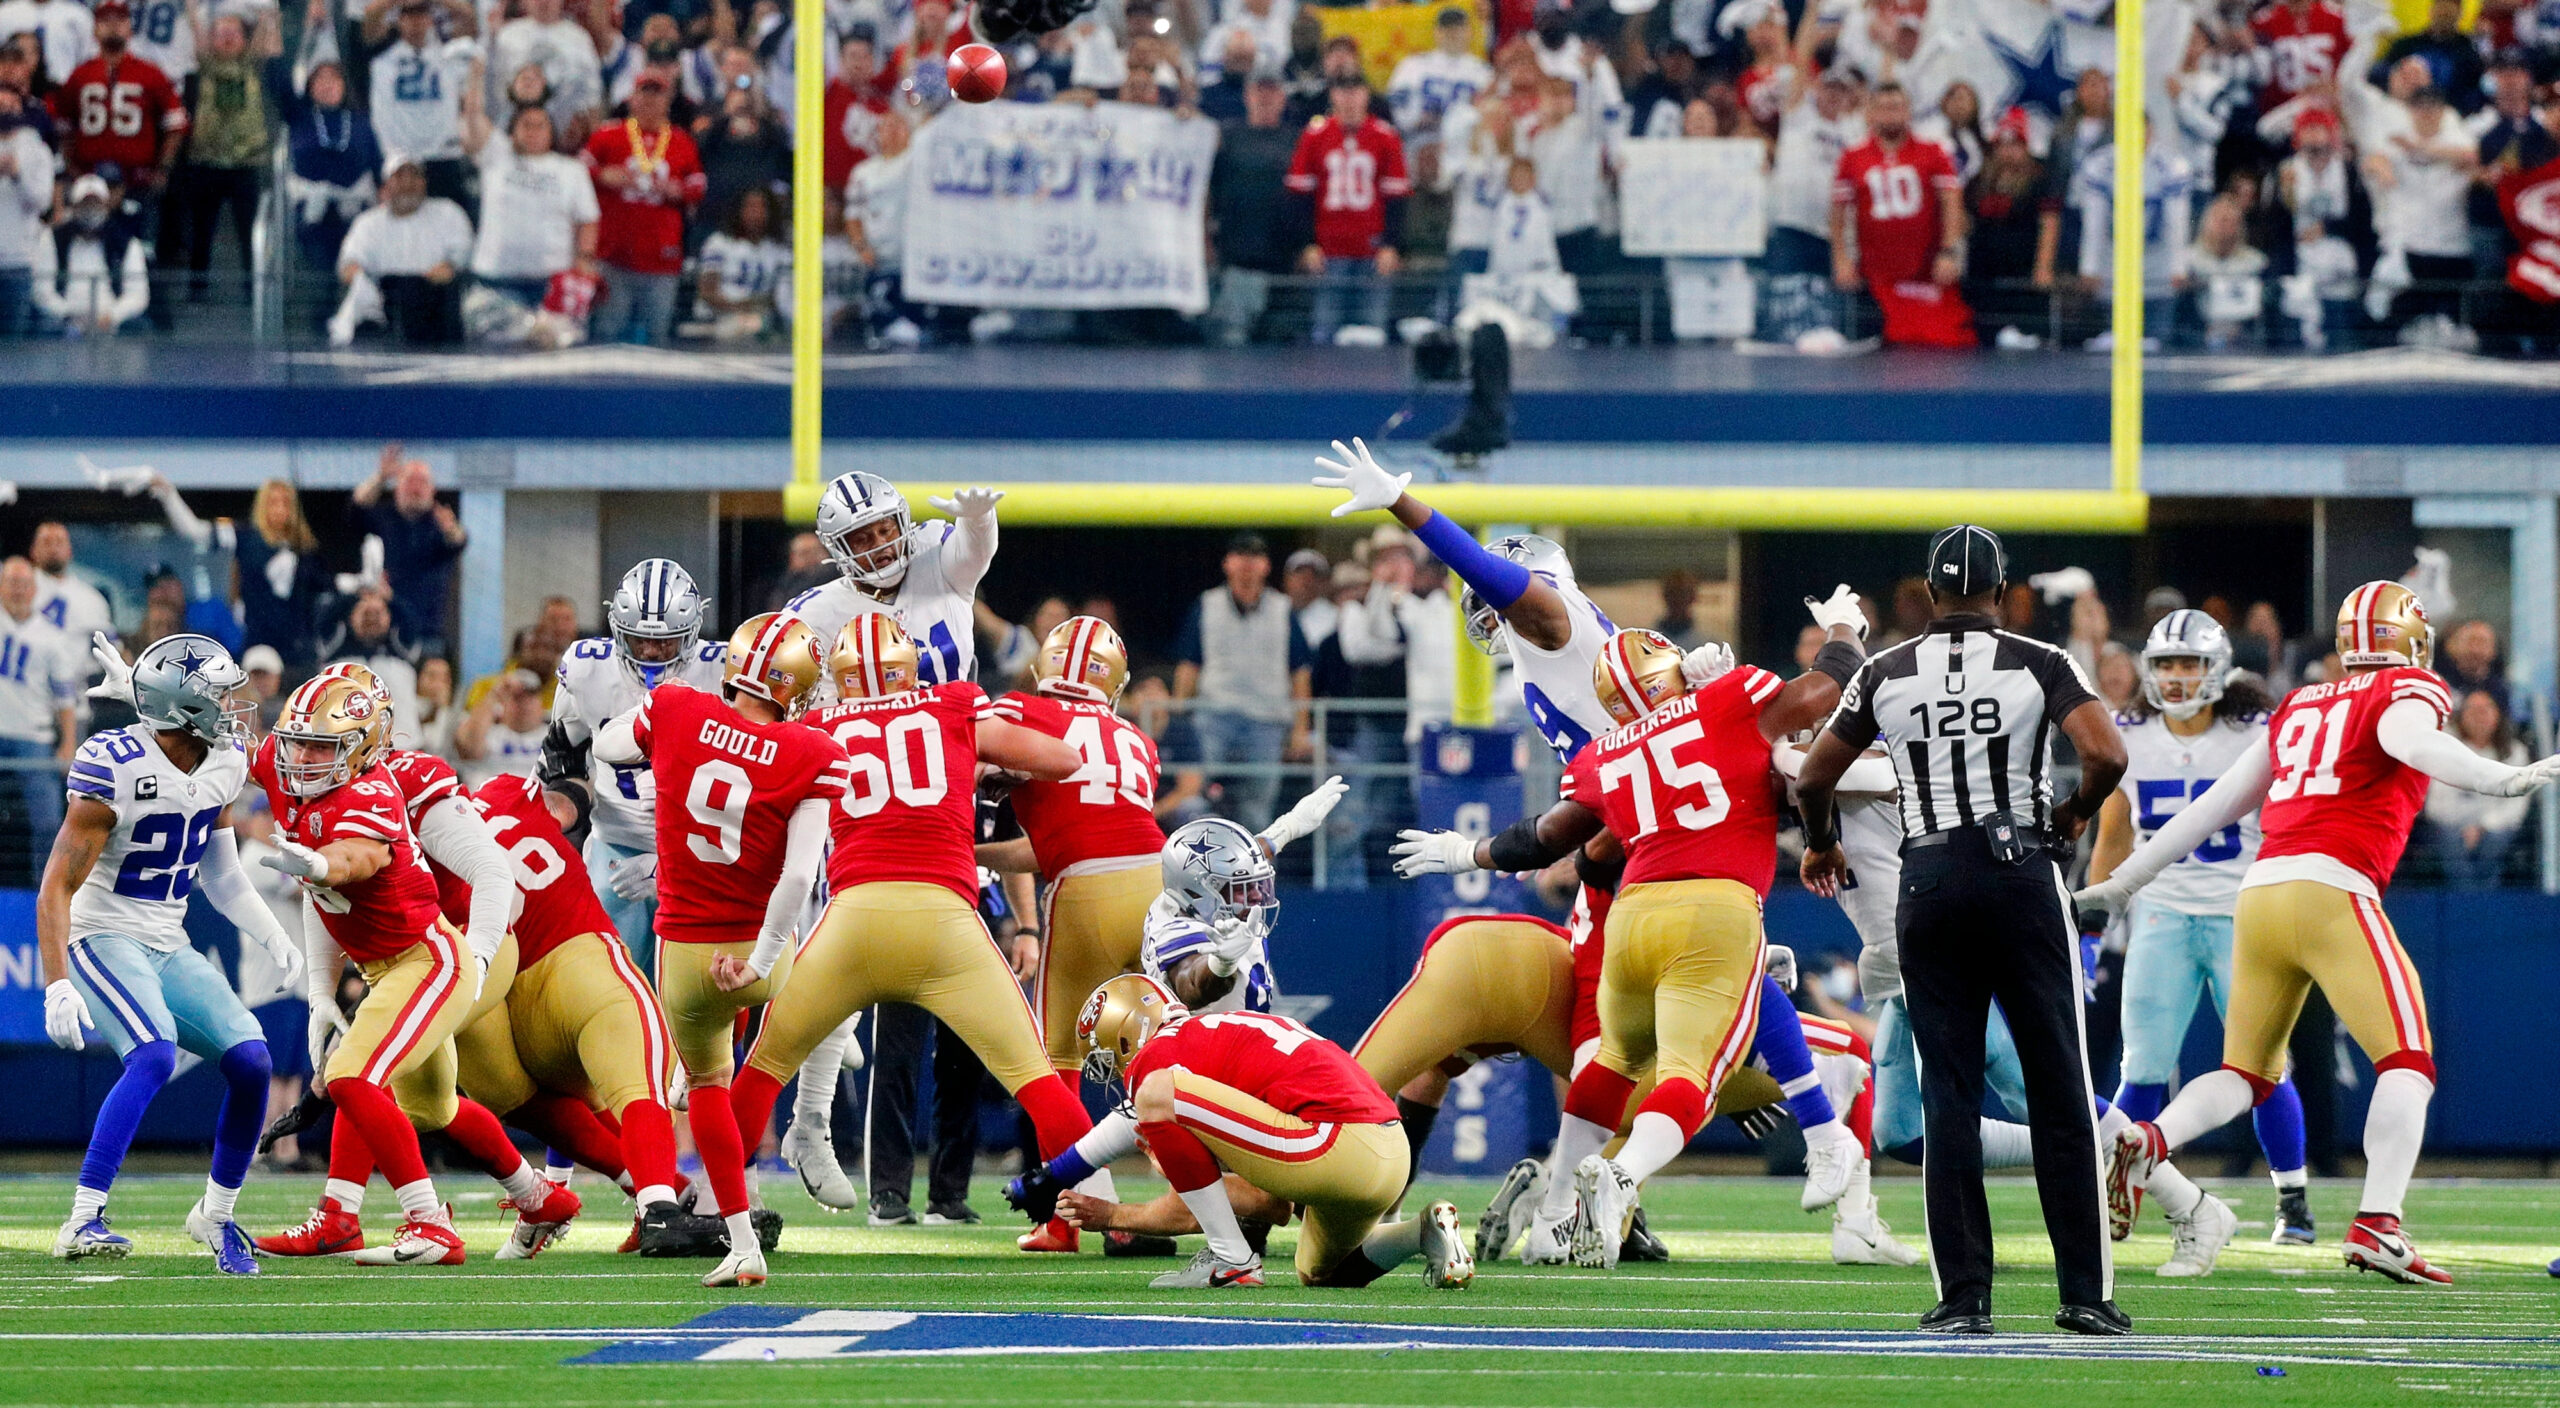 San Francisco 49ers playoff tickets skyrocket for game against Cowboys